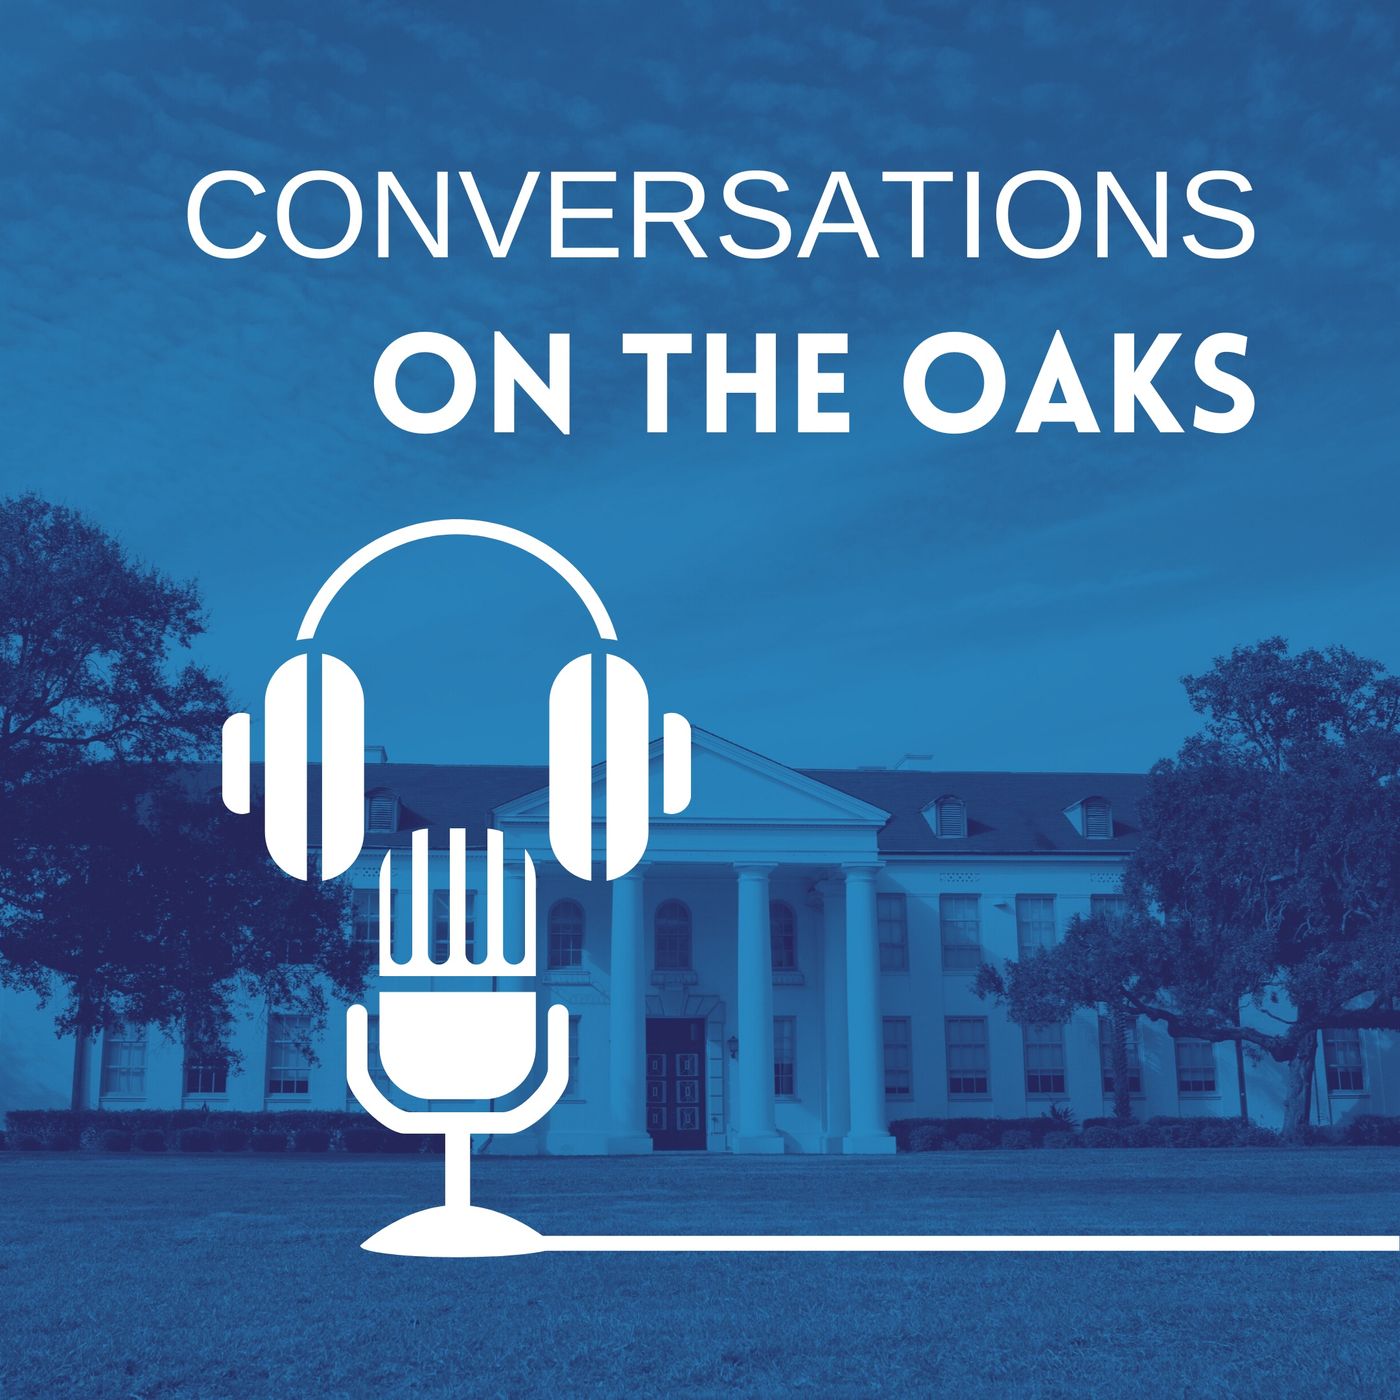 Conversations on the Oaks